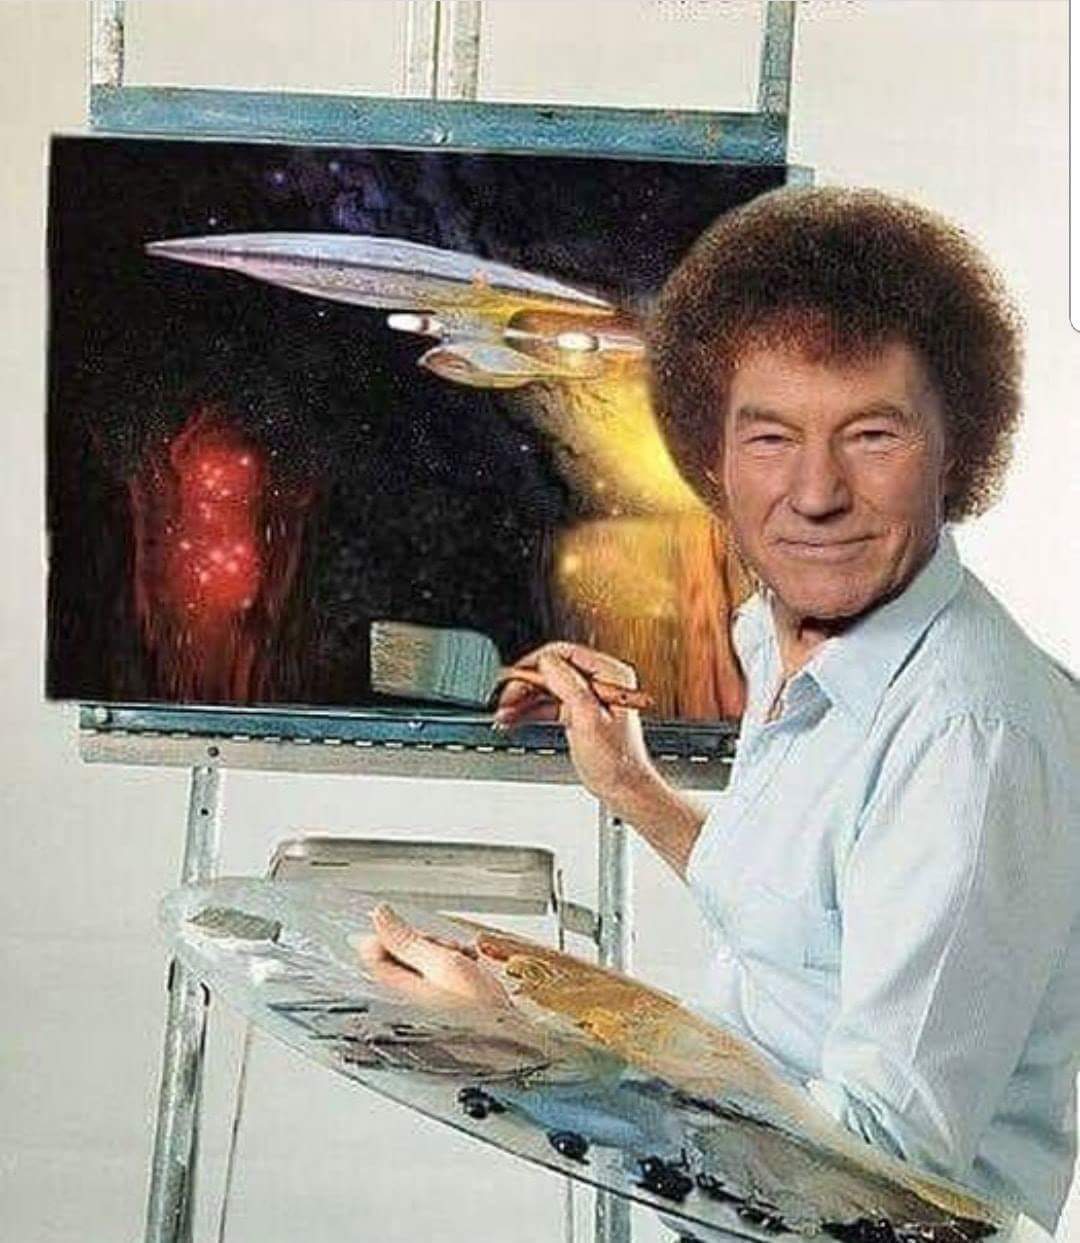 batchc's dong in a starship painting - meme